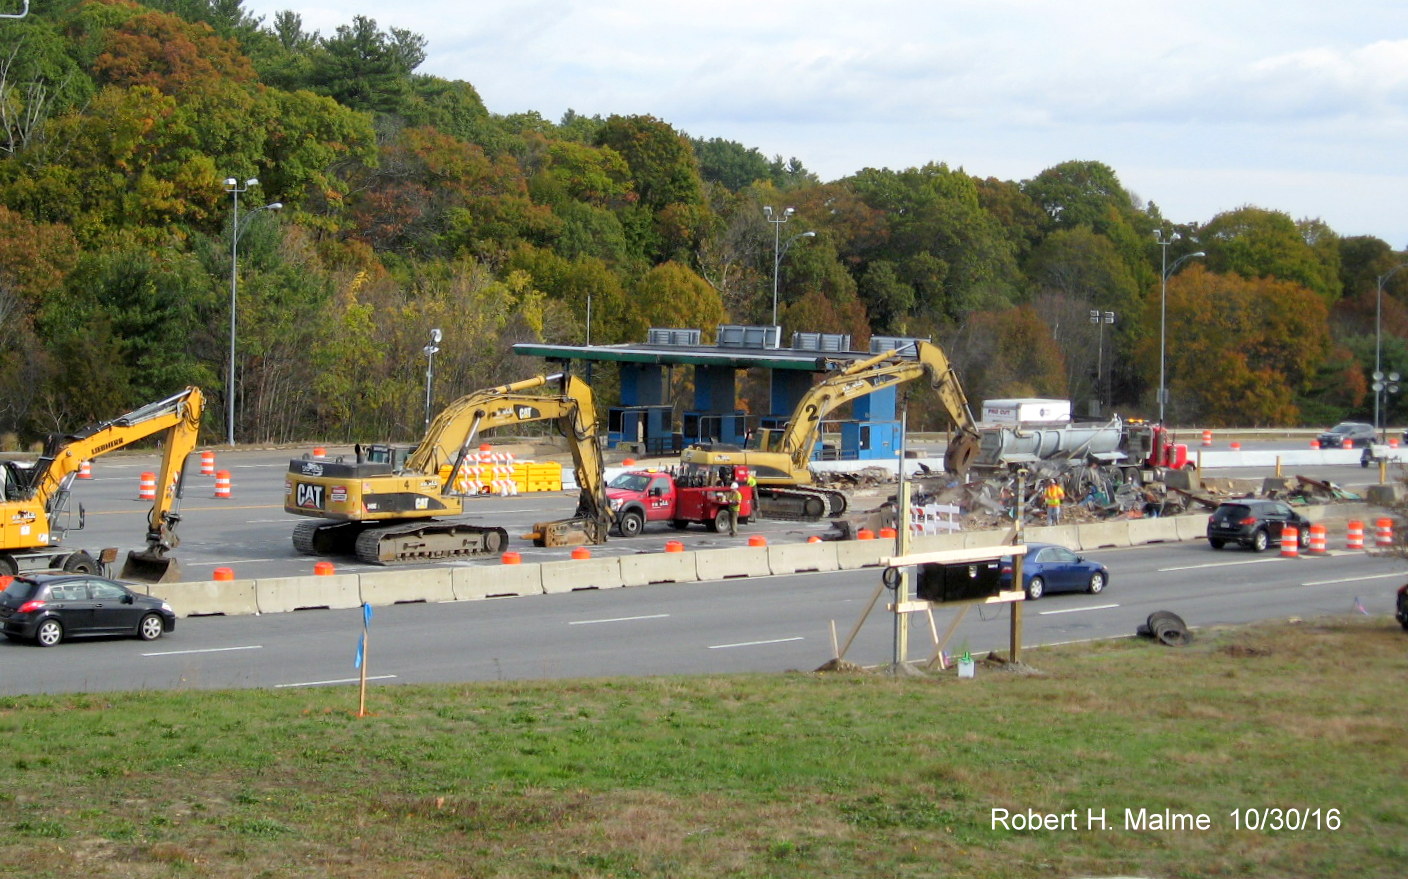 Image of toll demolition under way at Weston Toll Plazas of I-90/Mass Pike after start of electronic tolling